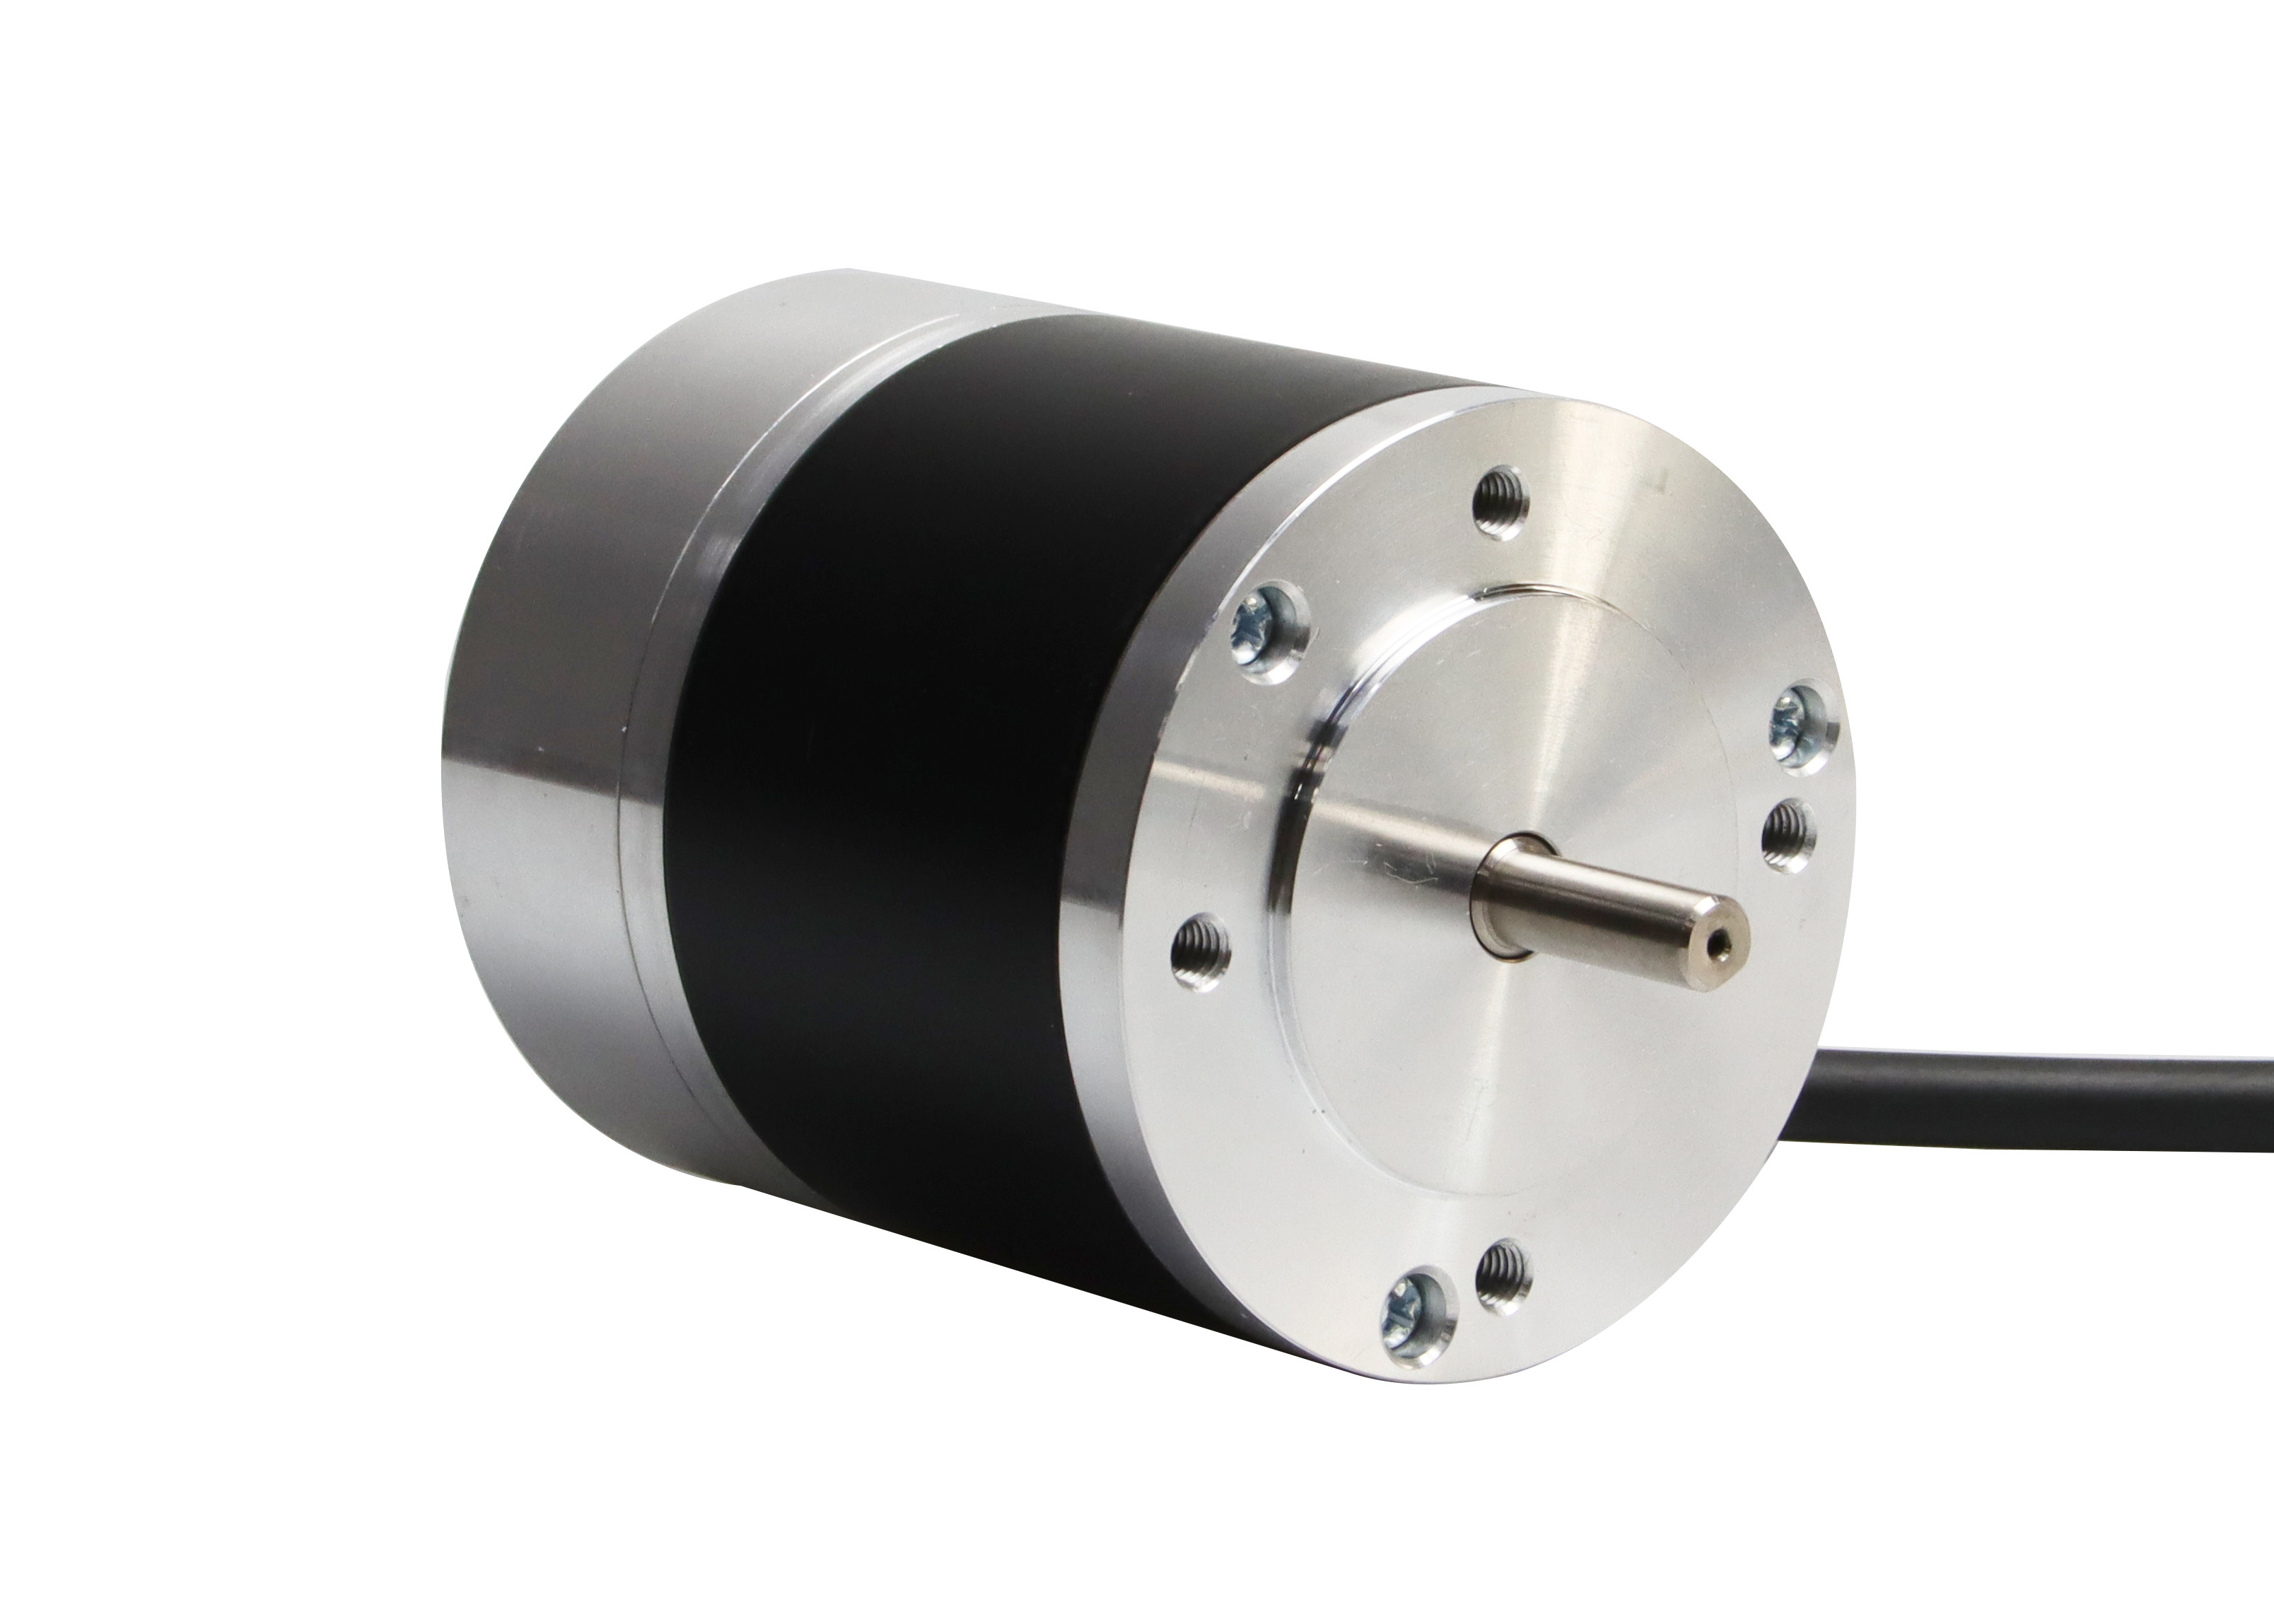 Round 80mm 60w 0.28N.M 3 Phase Waterproof Brushless Dc Motor With Integrated Controller